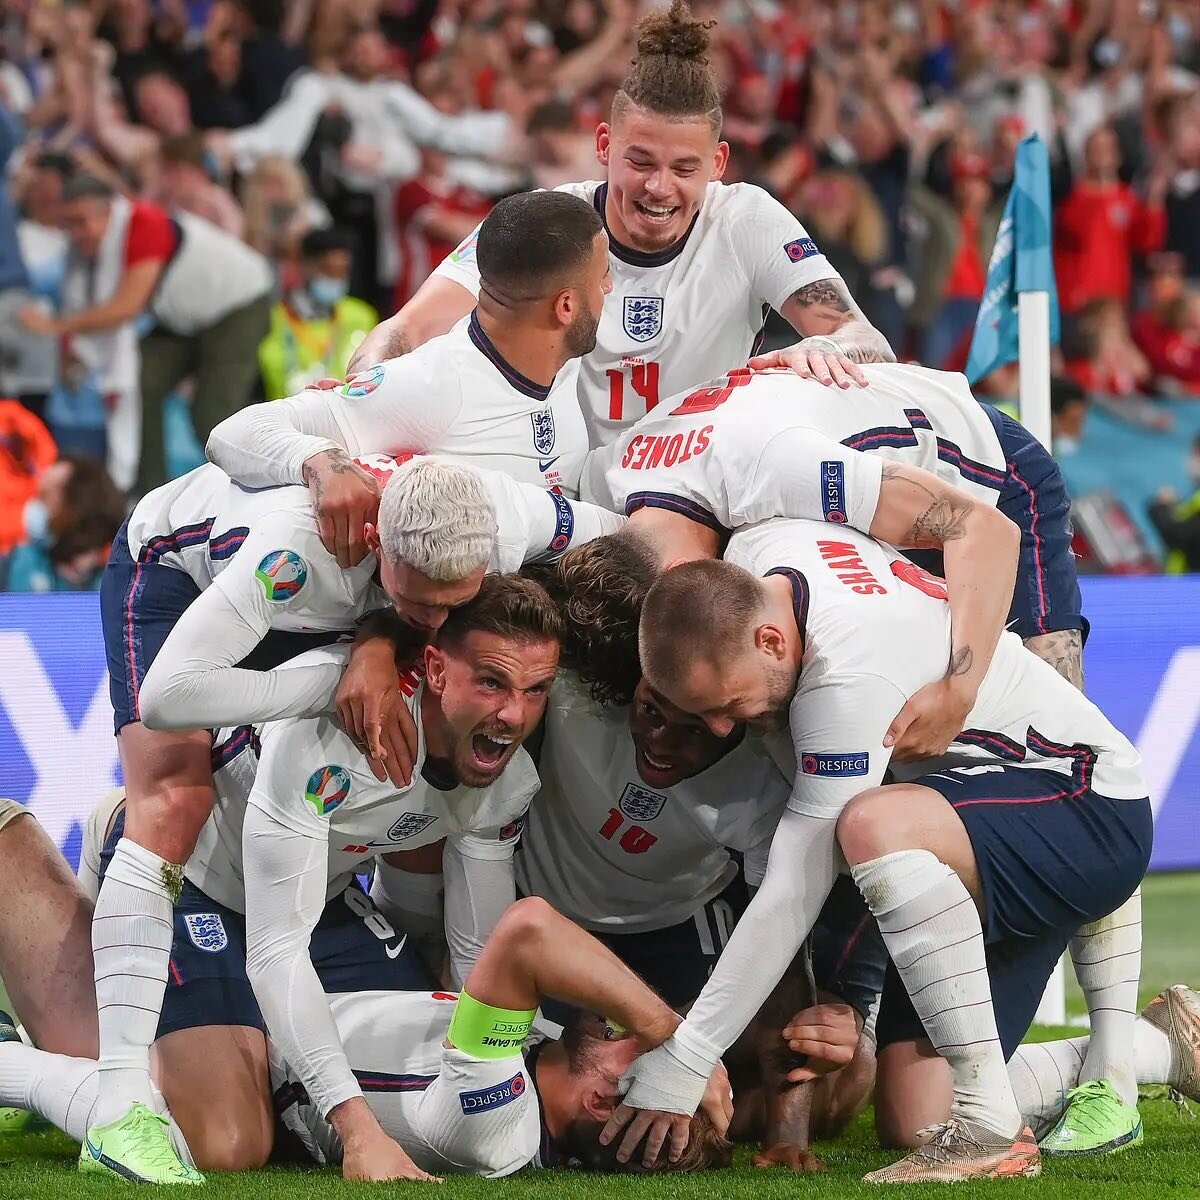 It&rsquo;s coming home, right?! That&rsquo;s why we are telling our amazing team to have a well deserved lay in on Monday! We will be open from 11am. Until then, we still believe! 🏴󠁧󠁢󠁥󠁮󠁧󠁿⚽️🏴󠁧󠁢󠁥󠁮󠁧󠁿⚽️🏴󠁧󠁢󠁥󠁮󠁧󠁿 #england #euro2020 #fin